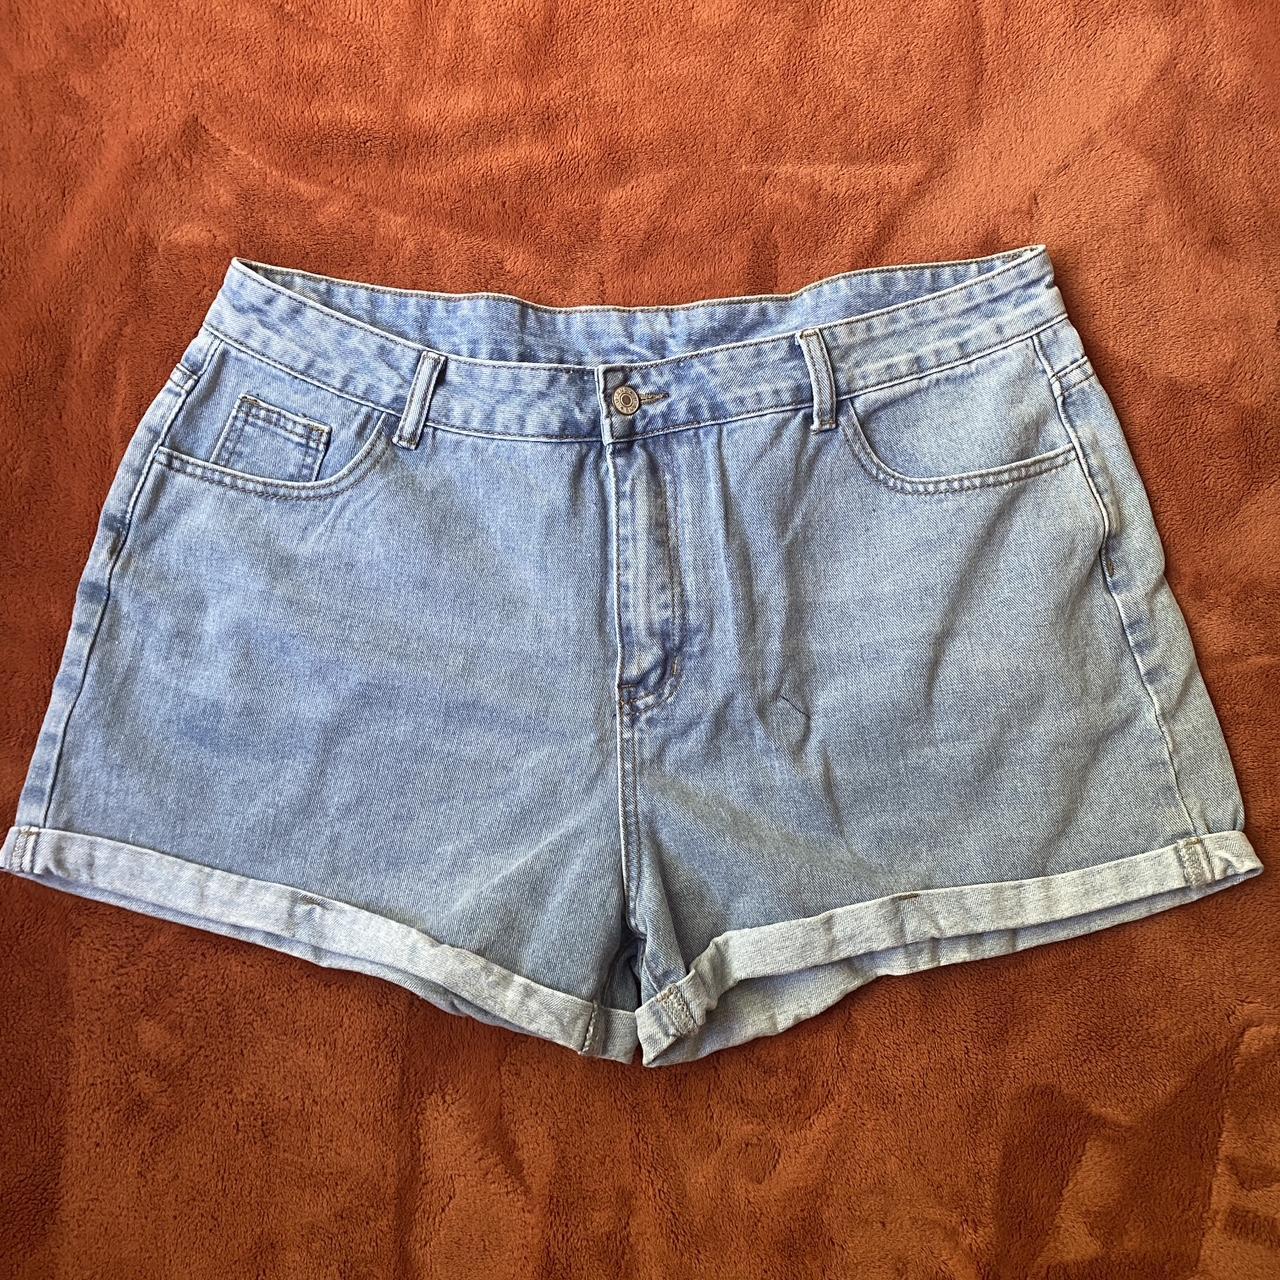 blue jean shorts from SHEIN #jeans #shorts... - Depop